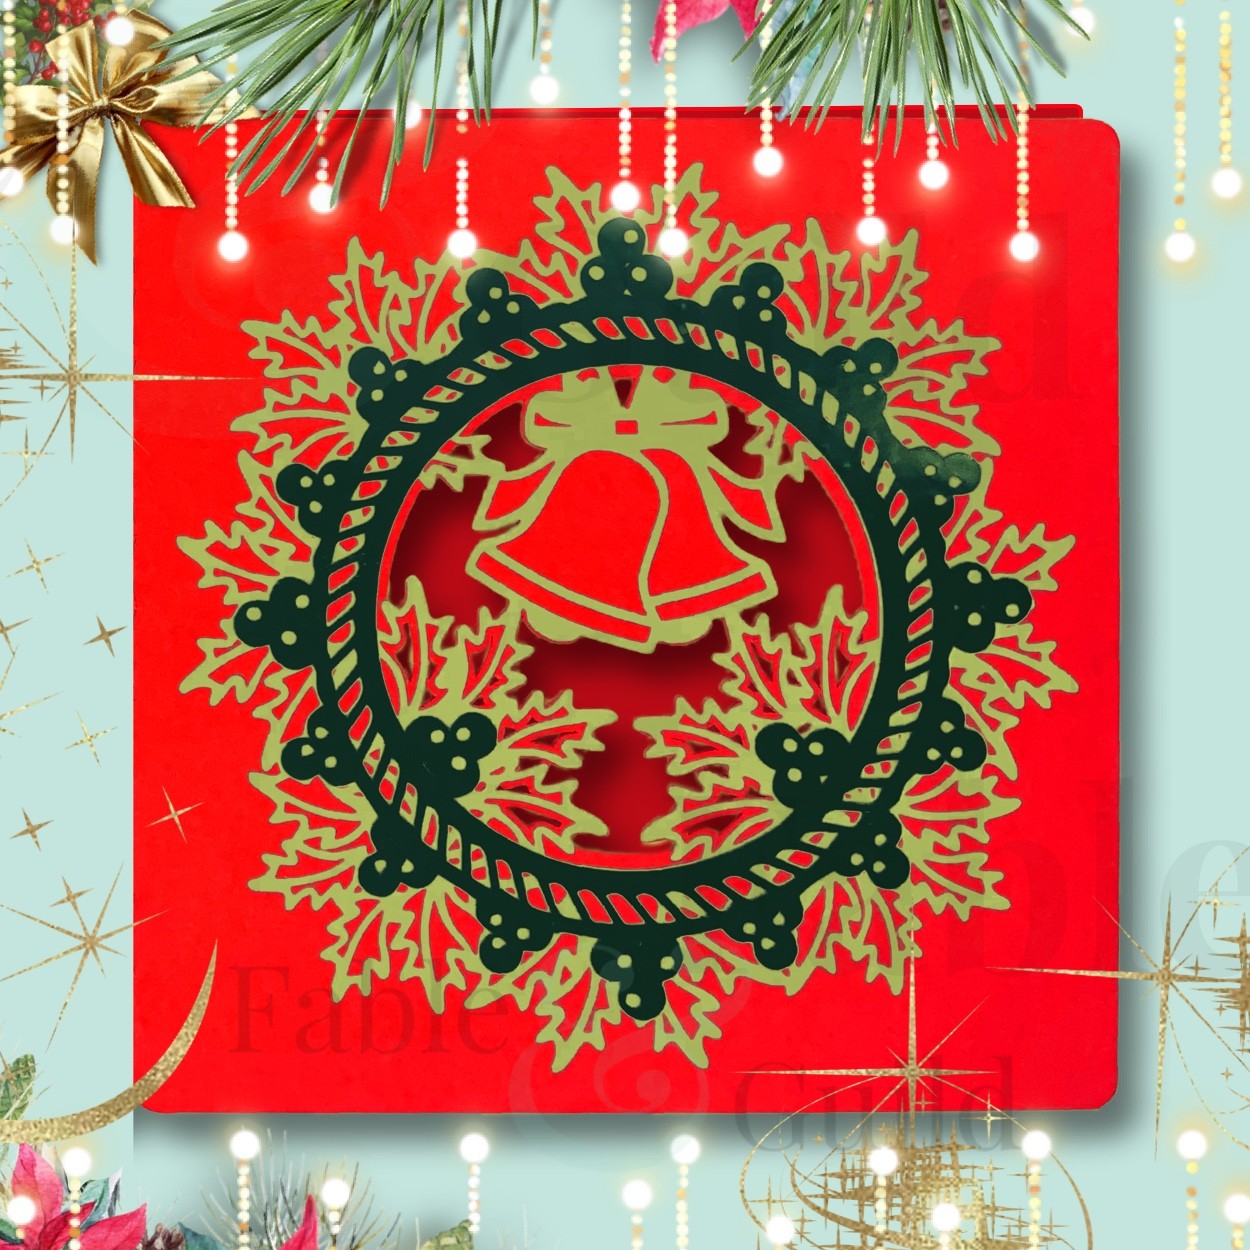 Download Festive Holly Wreath Cut File 3d Xmas Card Fable Guild